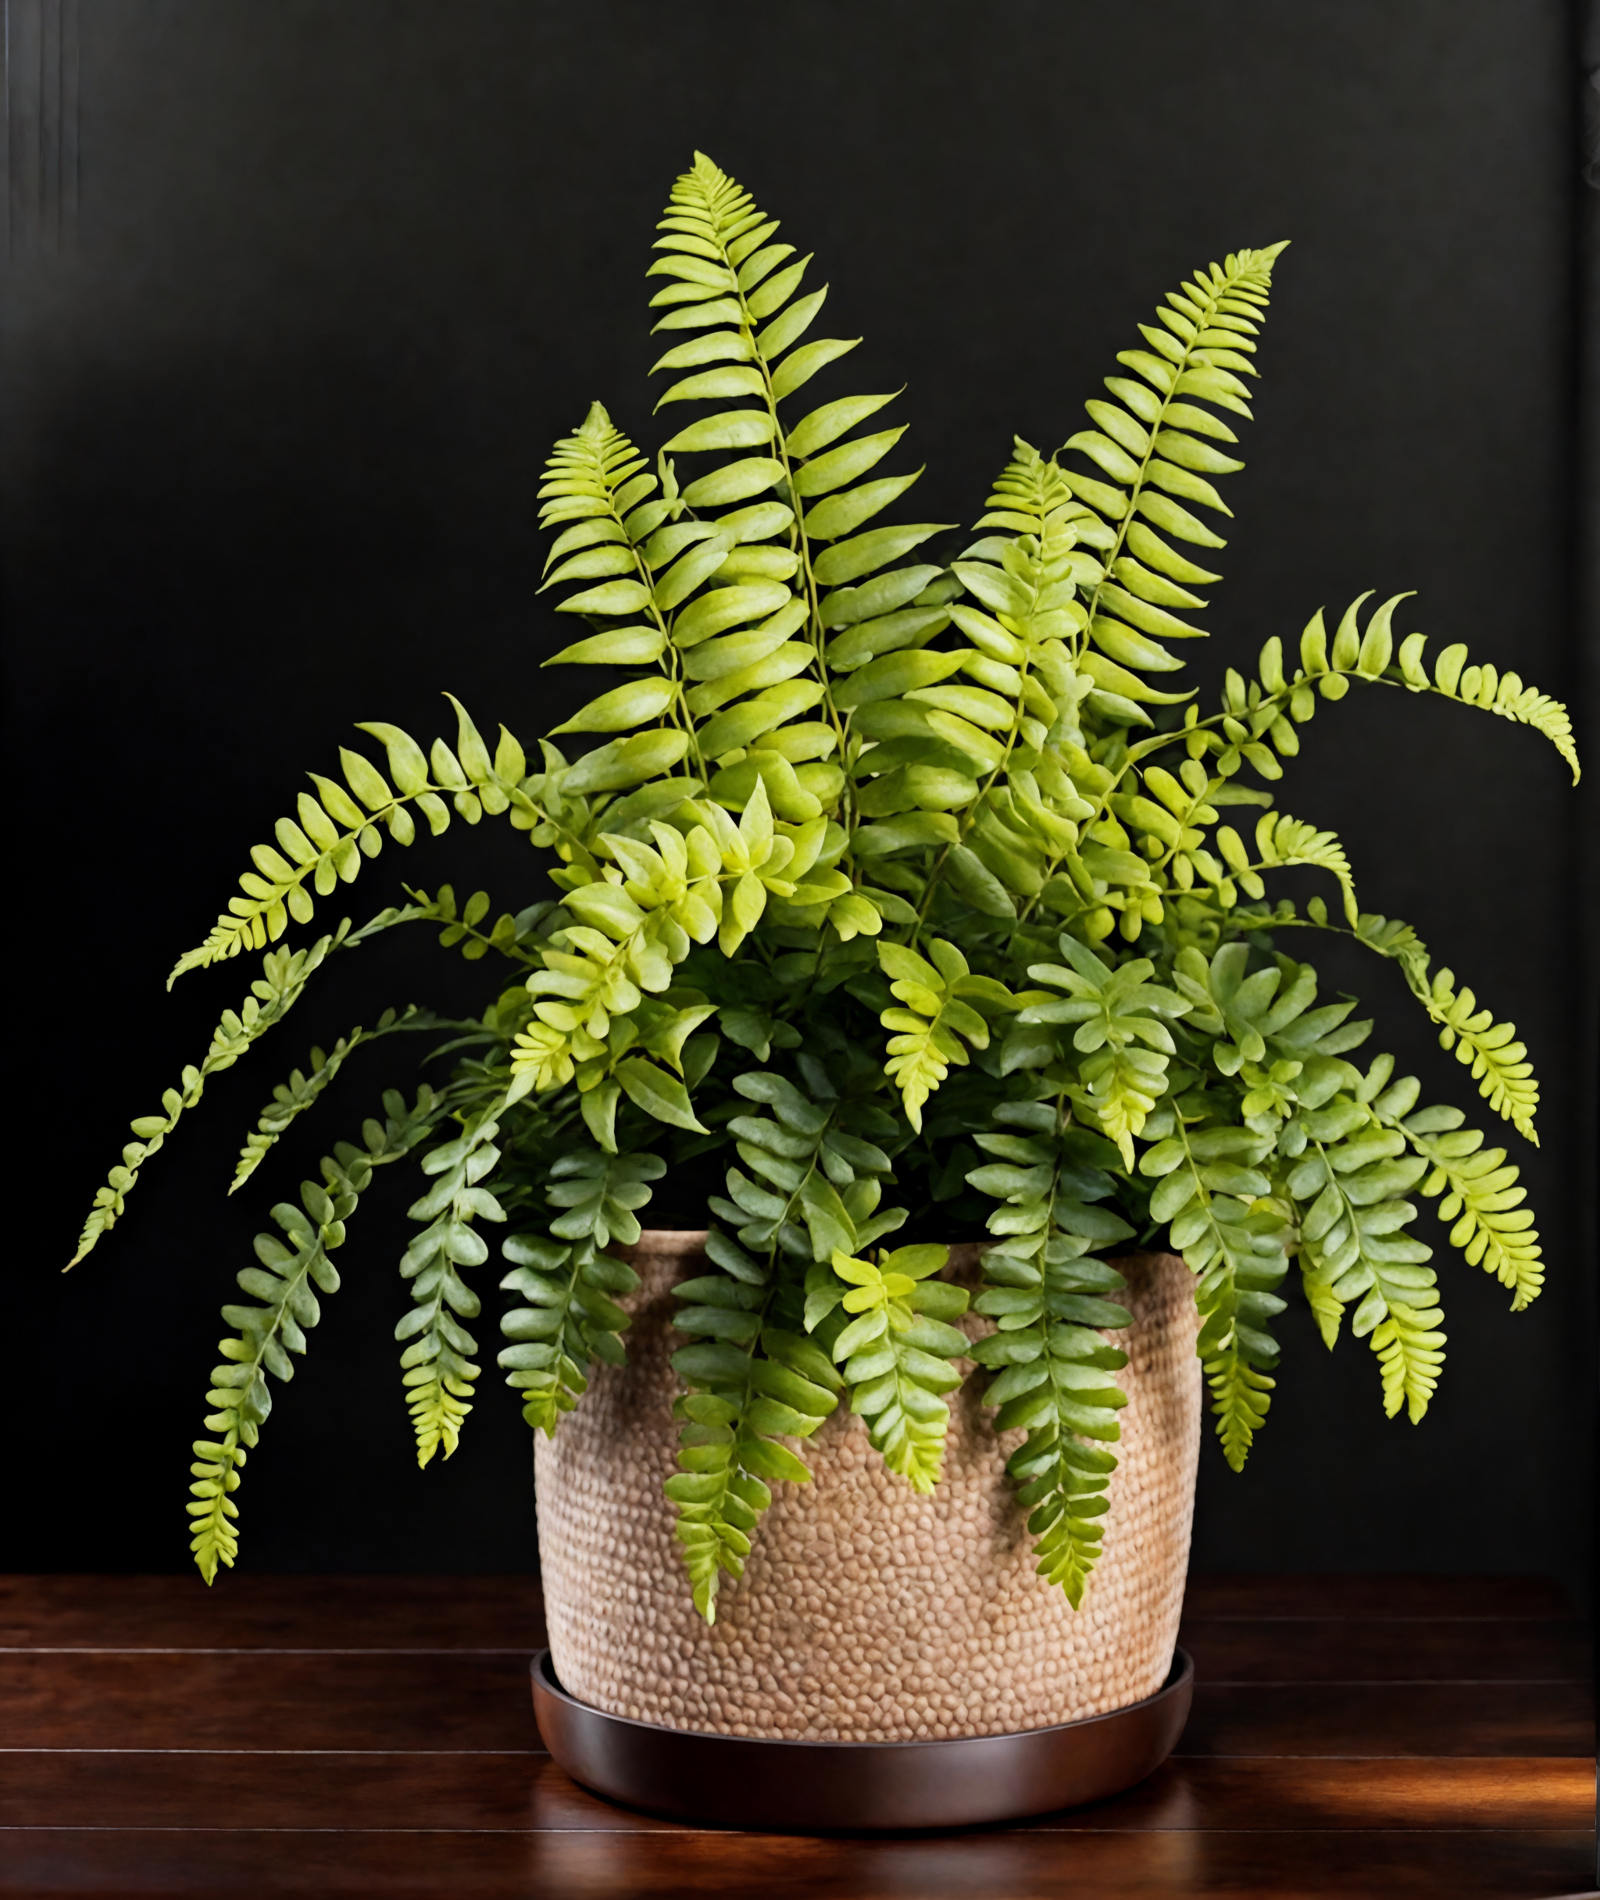 Nephrolepis exaltata (Boston fern) in a brown vase on a wooden table, with clear lighting and a dark background.